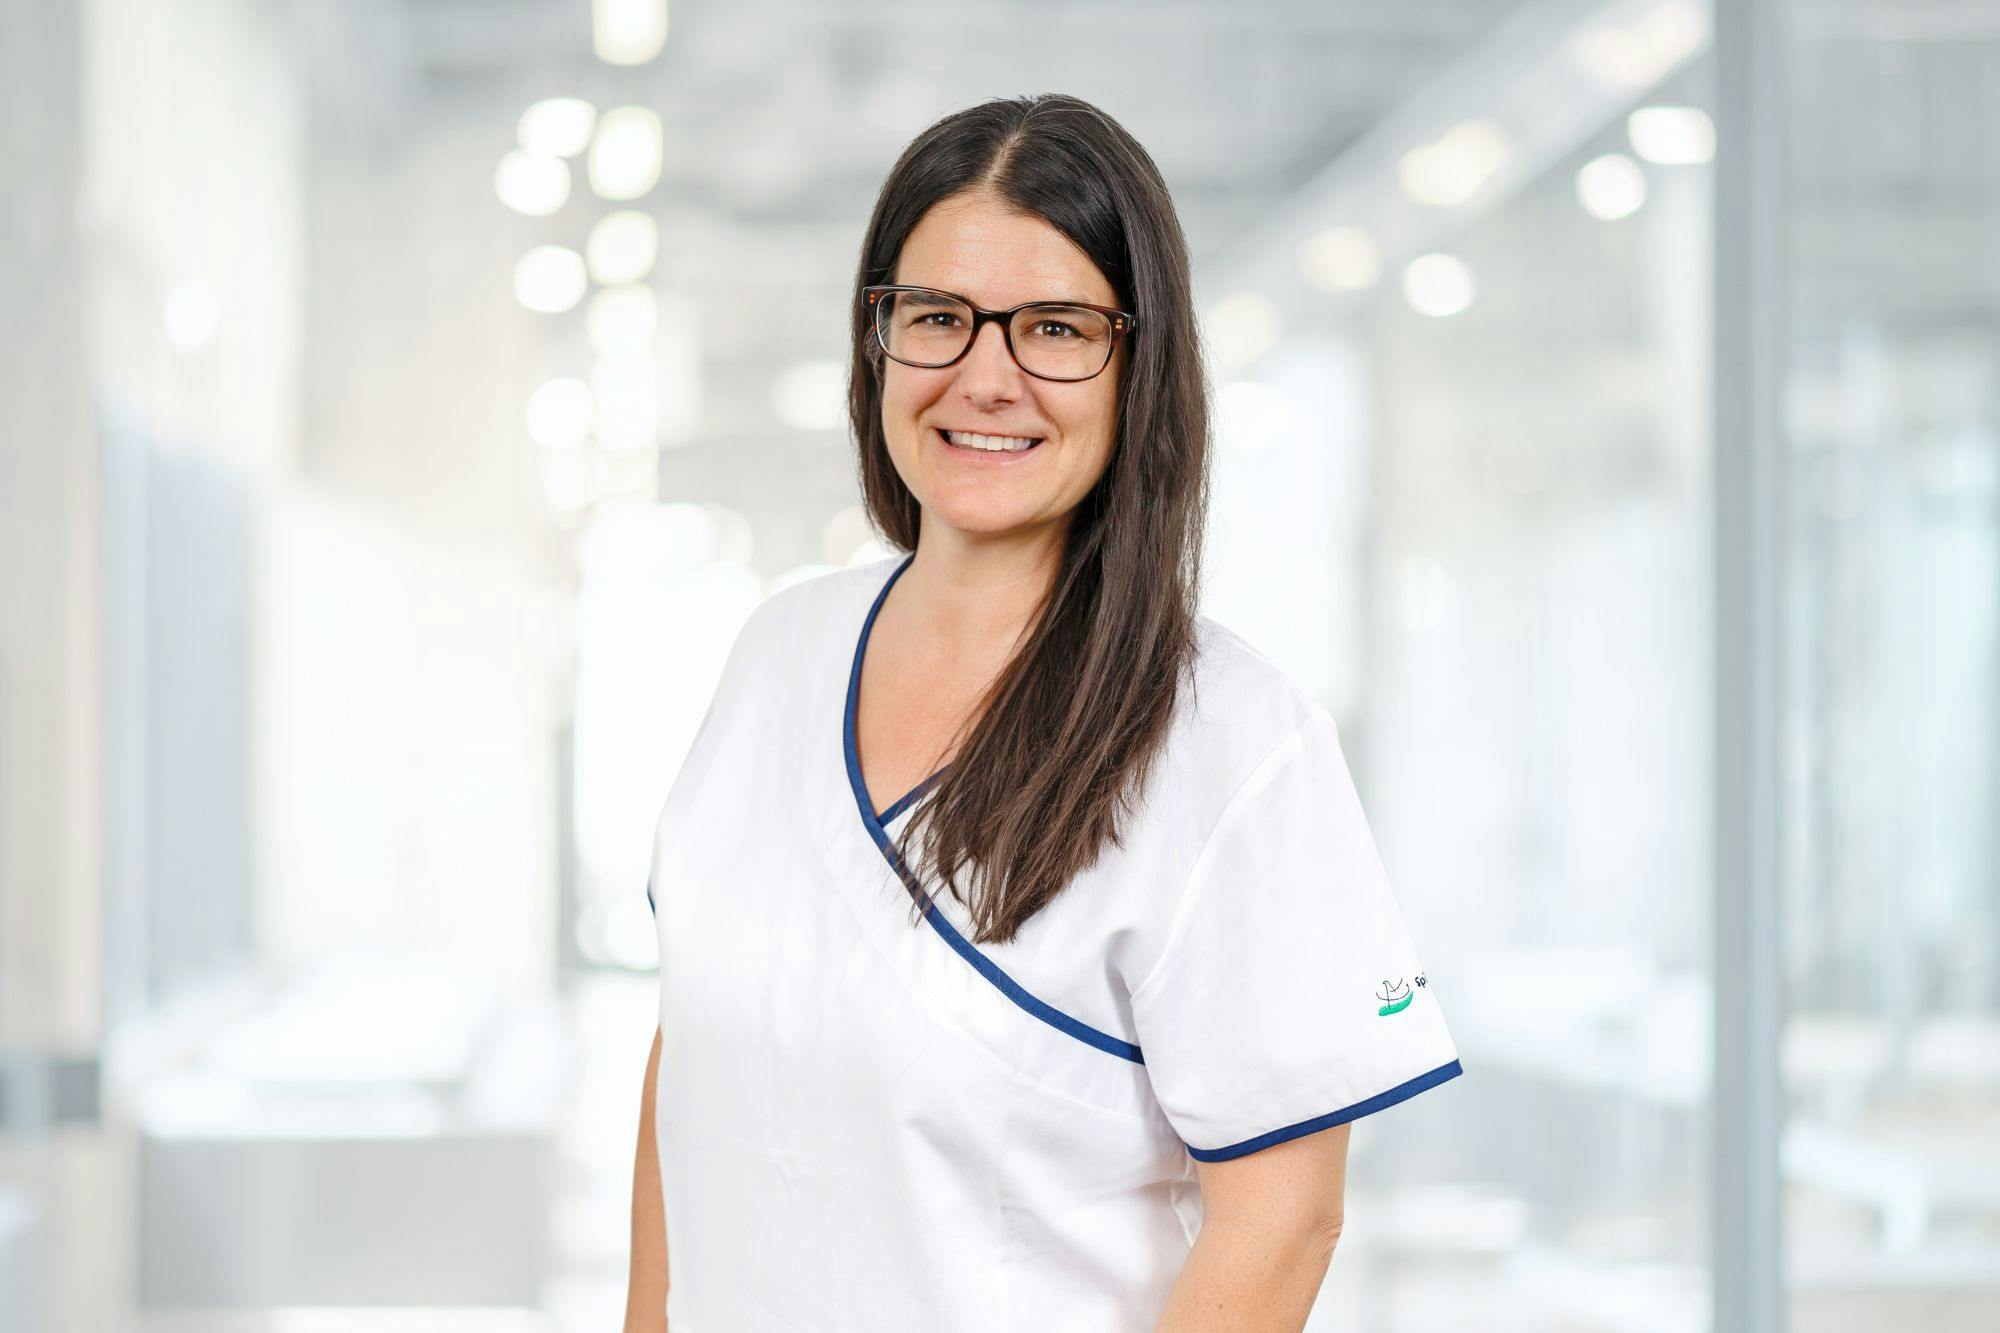 Smiling woman in medical professional clothing with glasses.